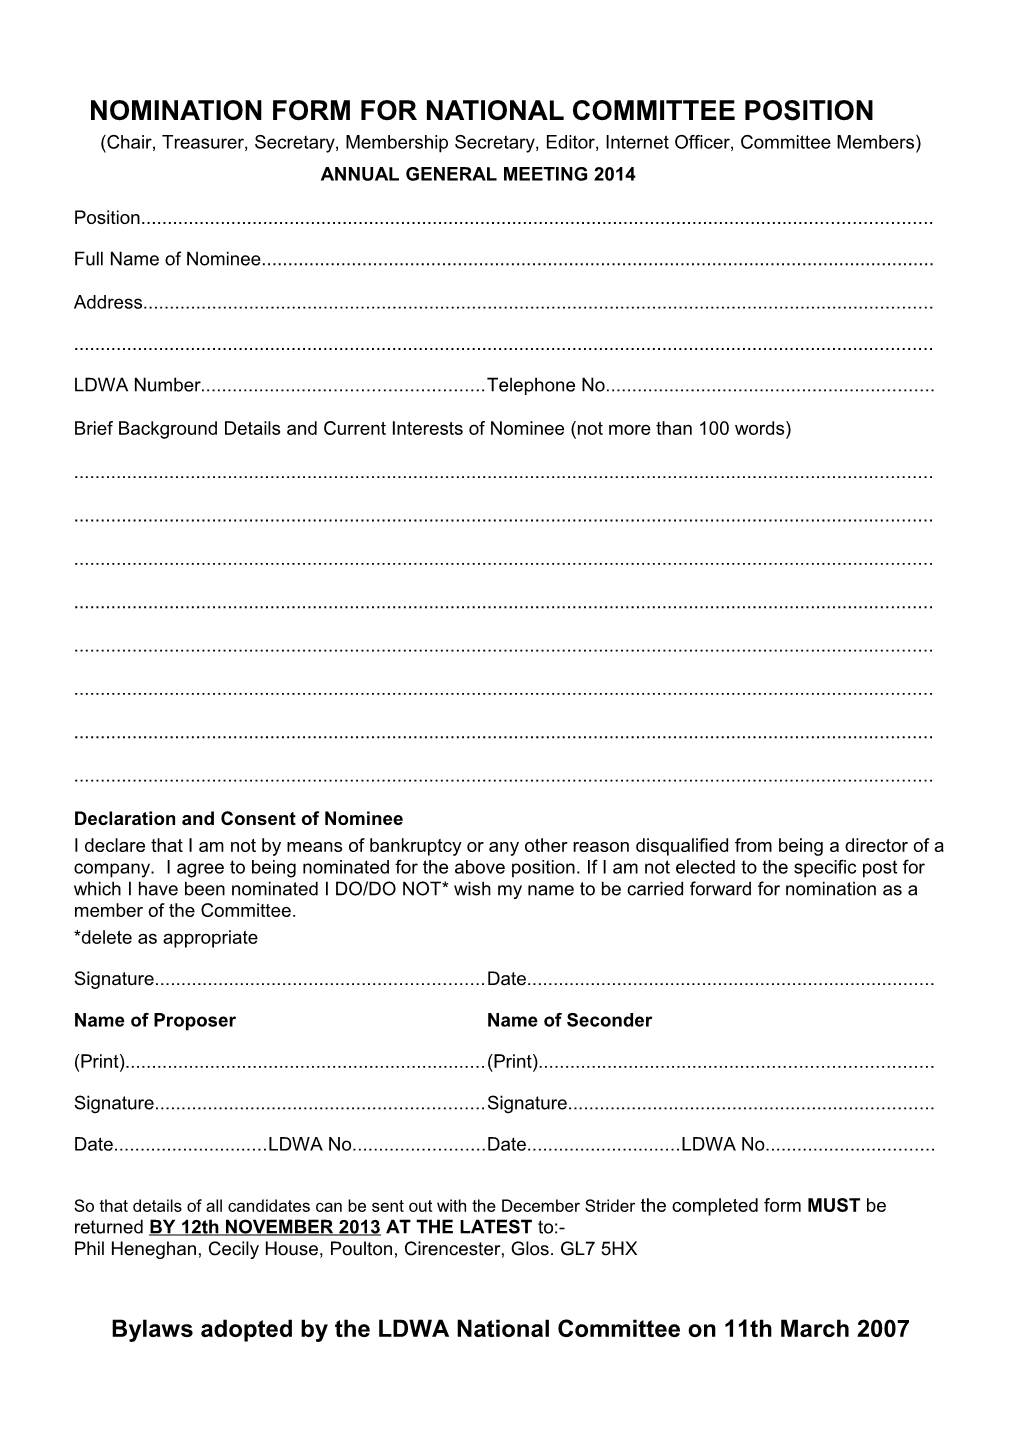 Nomination Form for National Committee Position